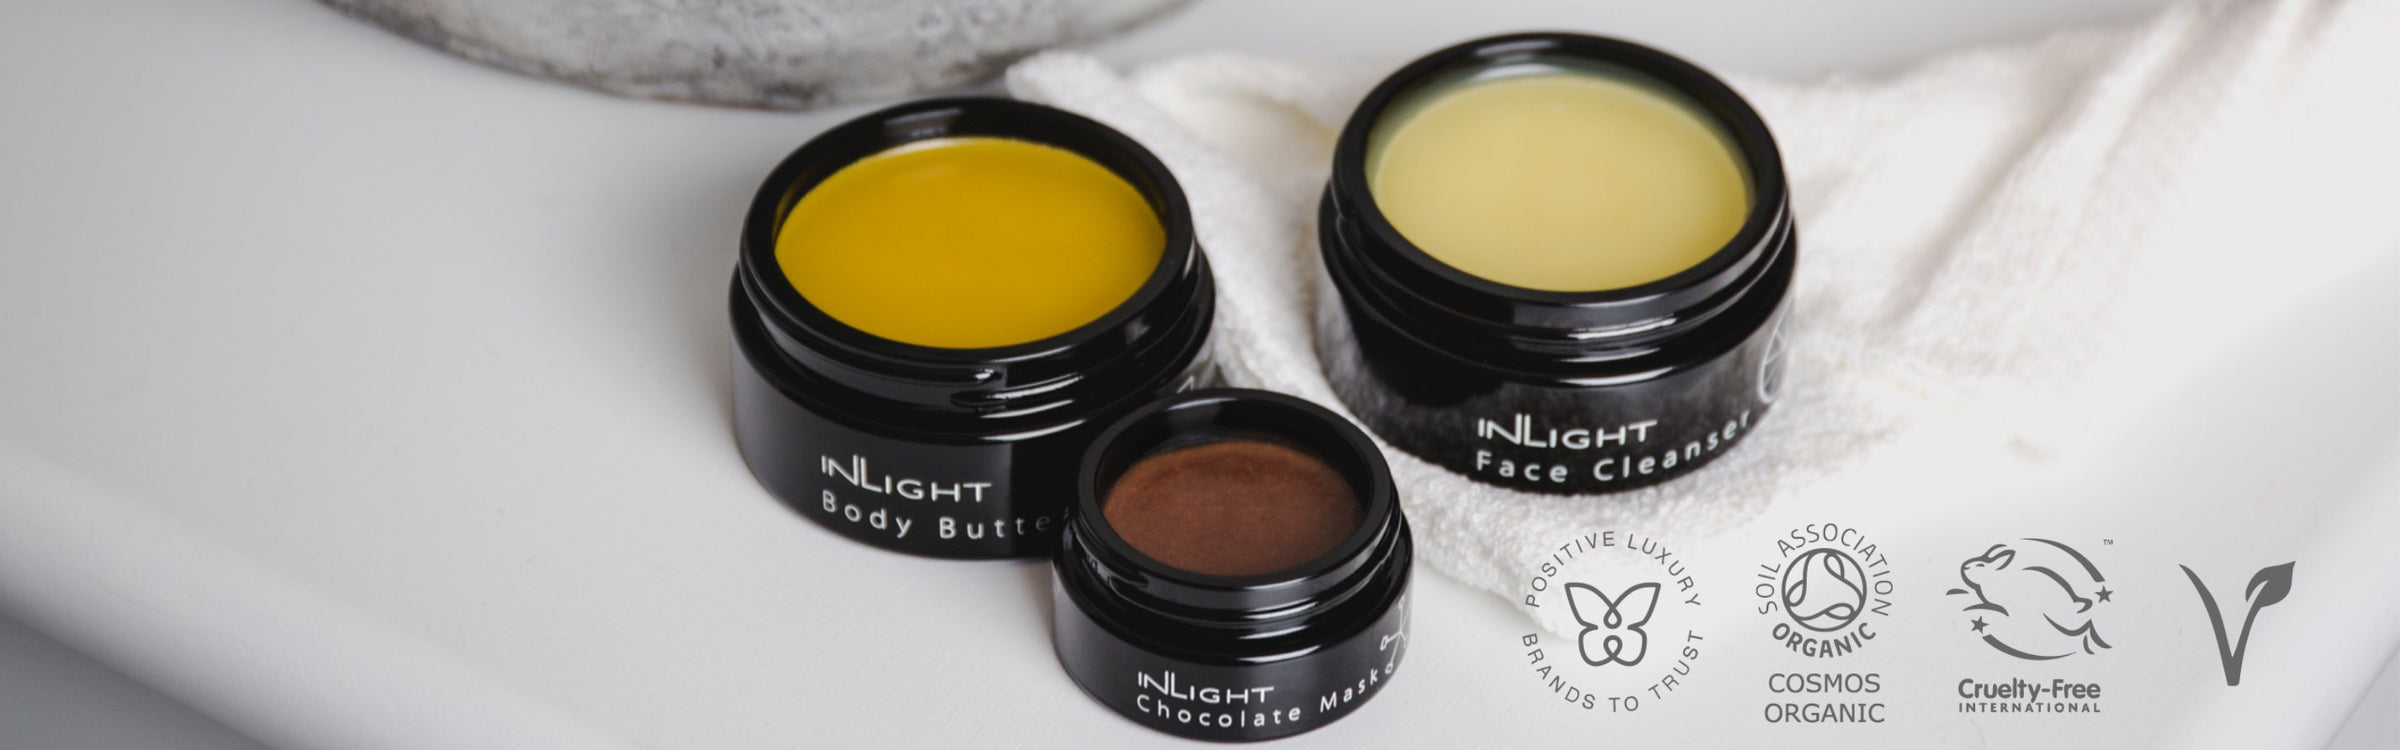 Inlight Beauty - Waterless Skincare & Beauty Collection. Image shows a woman holding two Inlight boxes and with a spot of Inlight waterless facemask on each of her cheeks. 